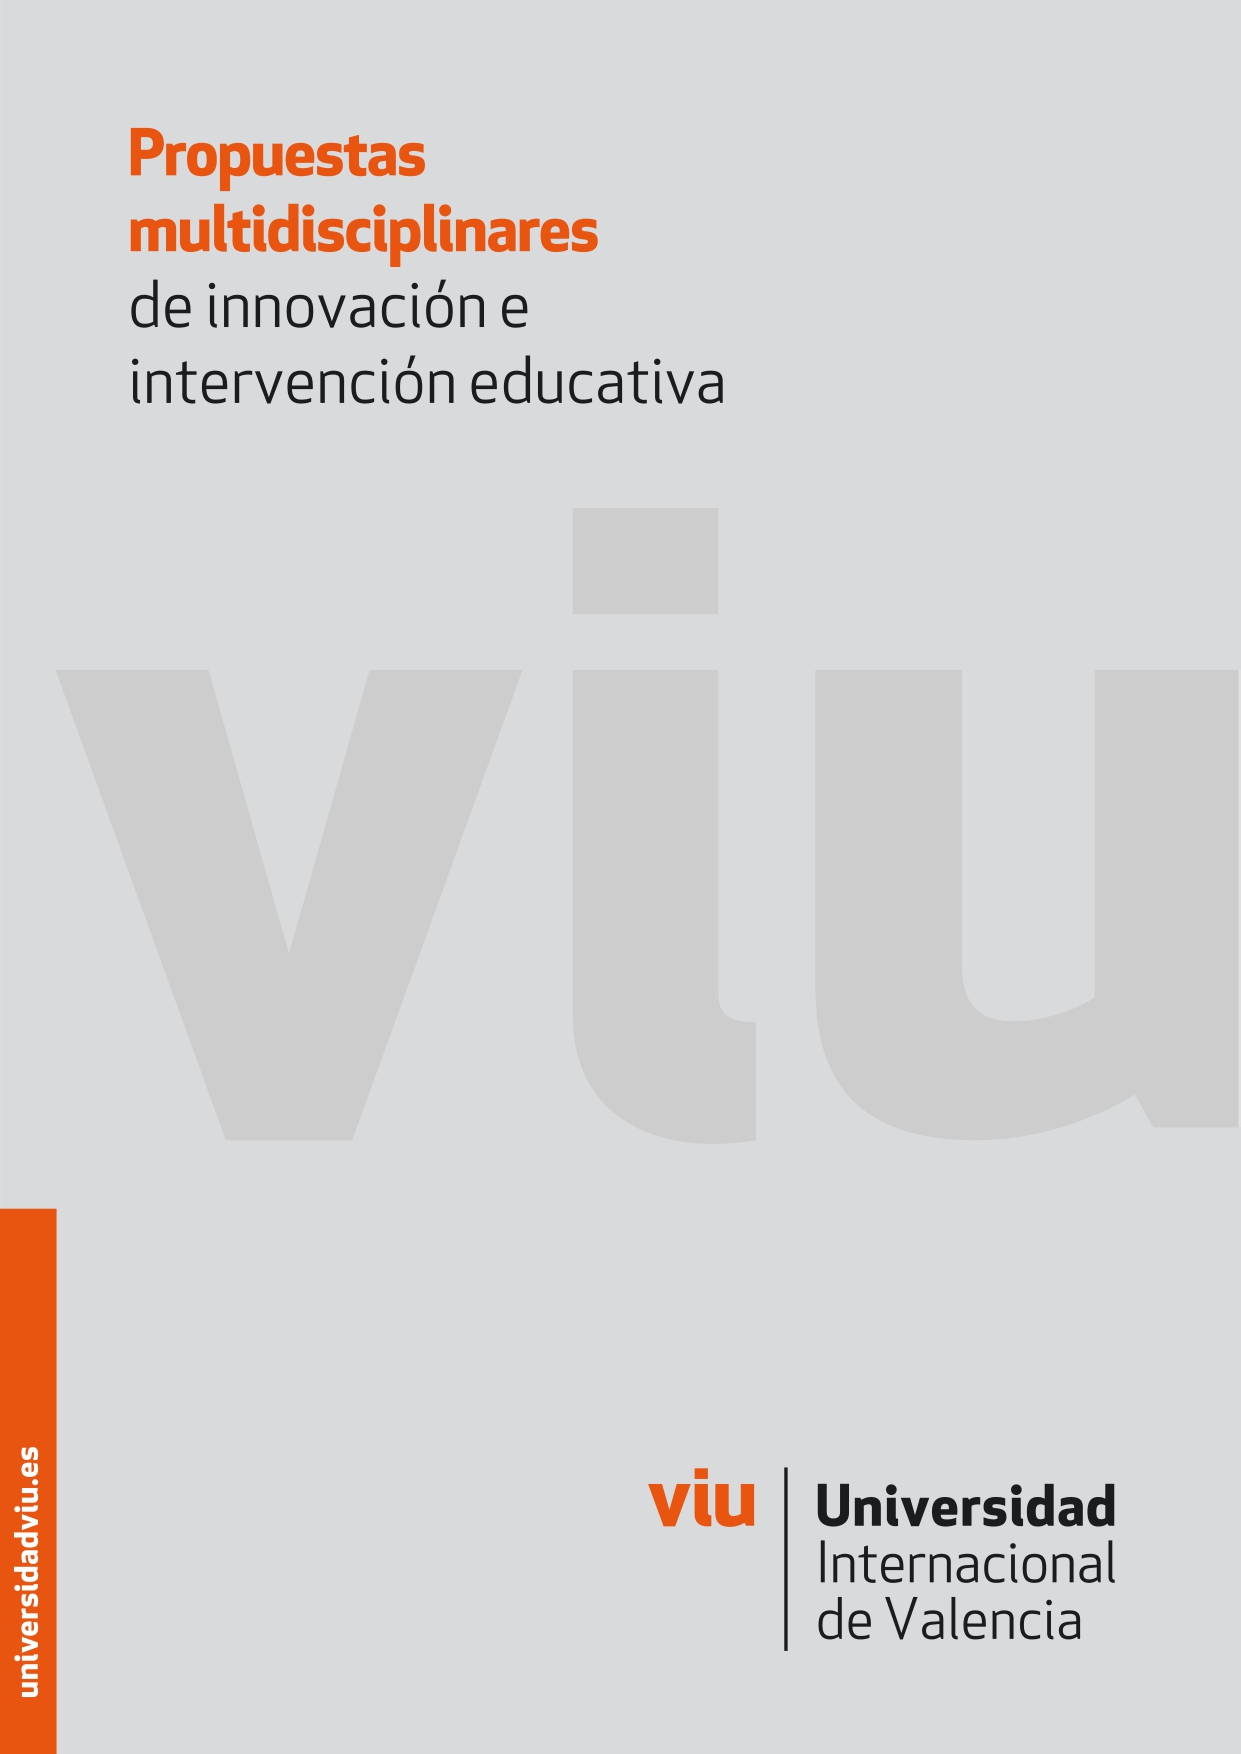 Systematic literature review for a characterization of the smart learning environments